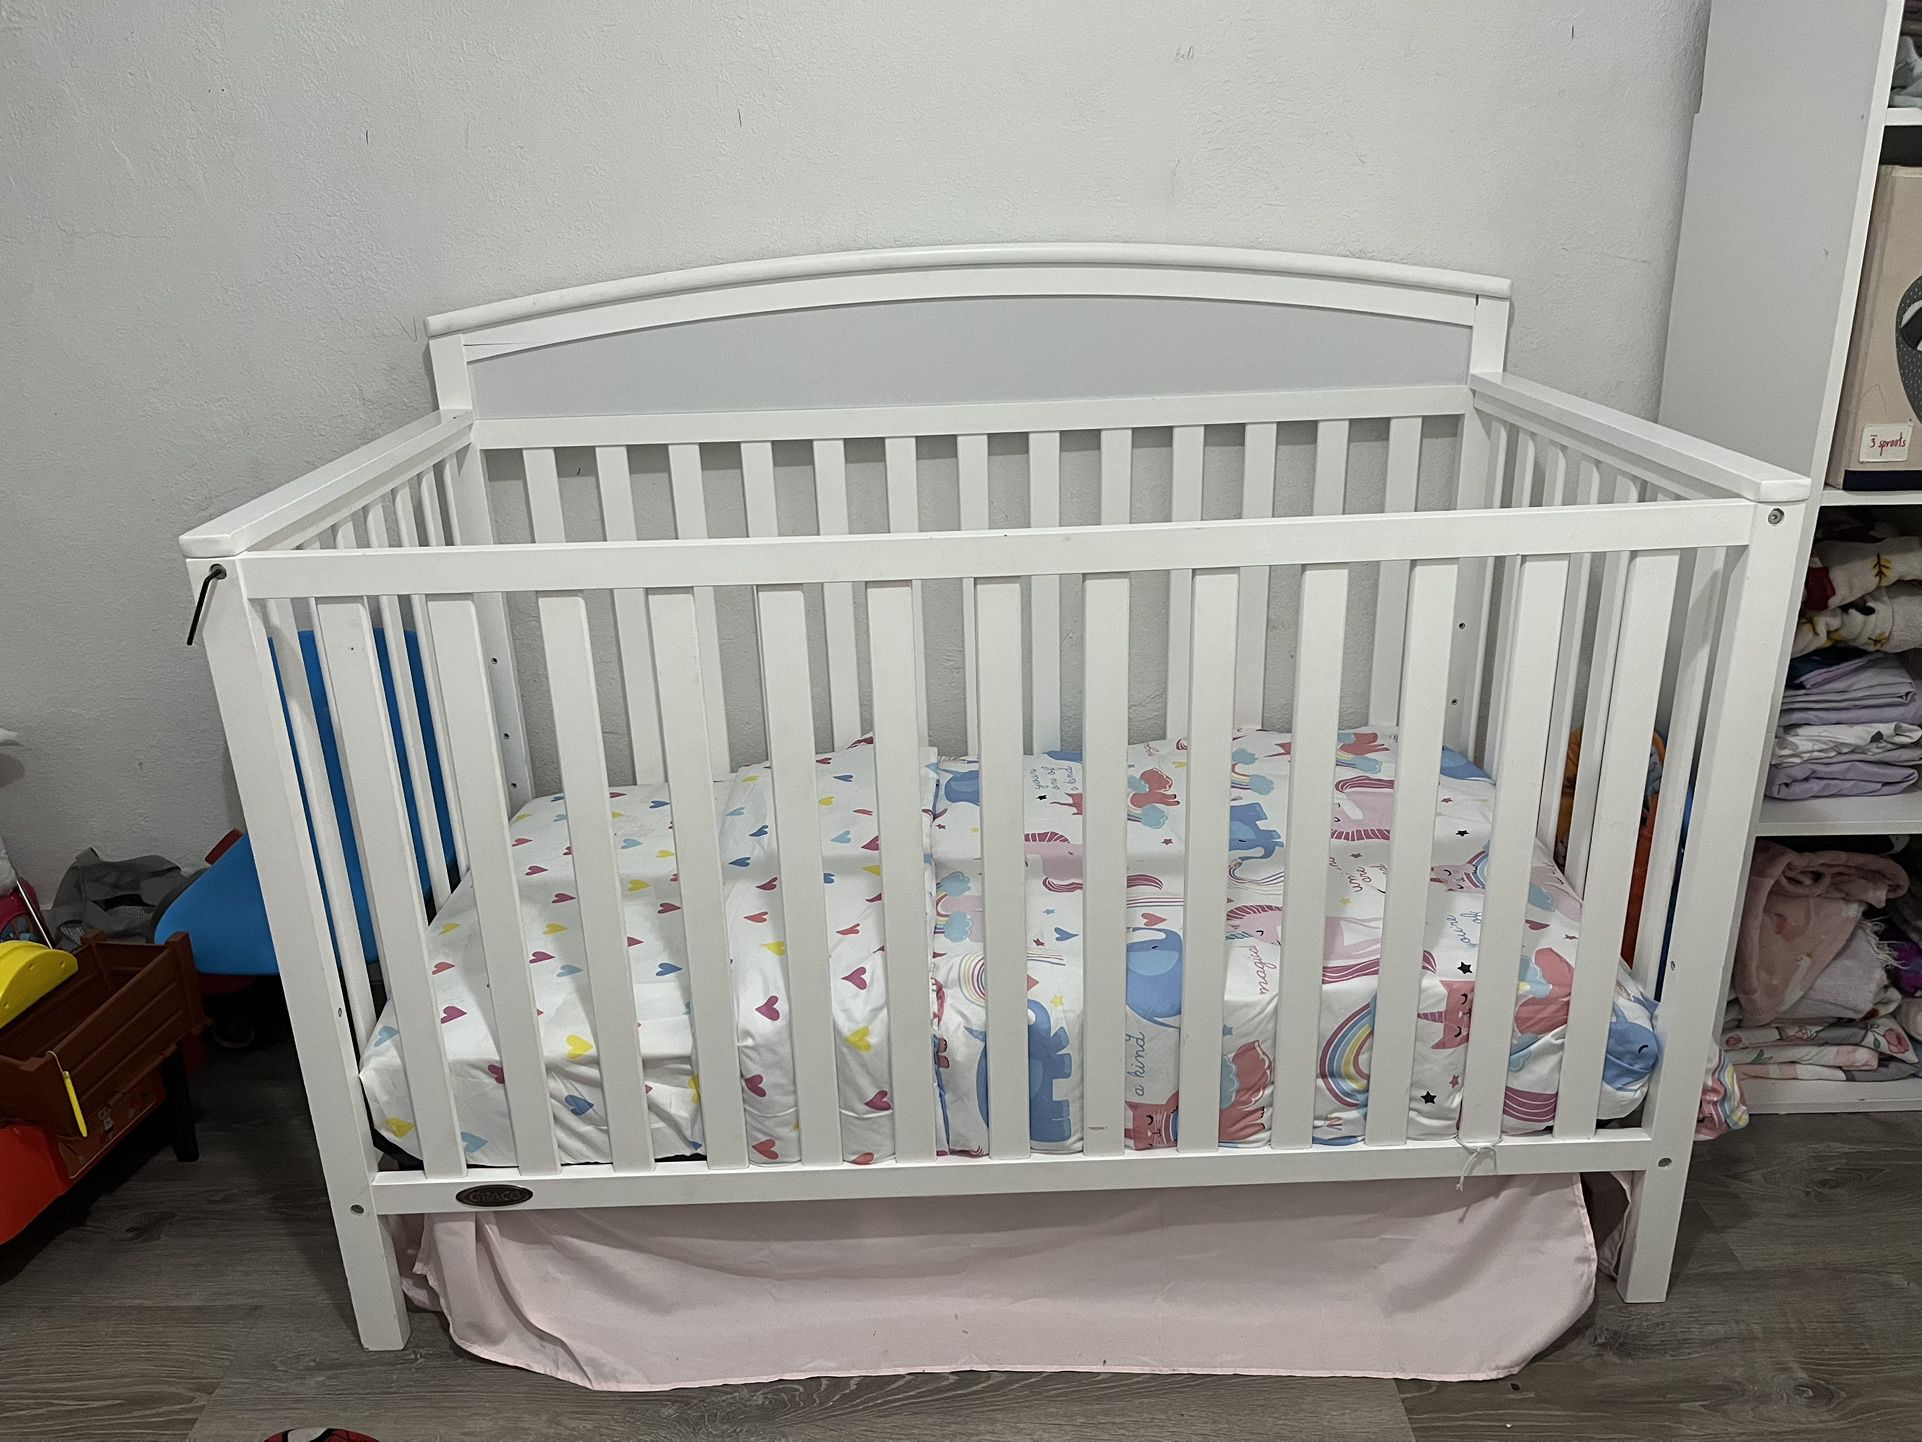 Baby Crío With Mattress New (free) Must Pick Up